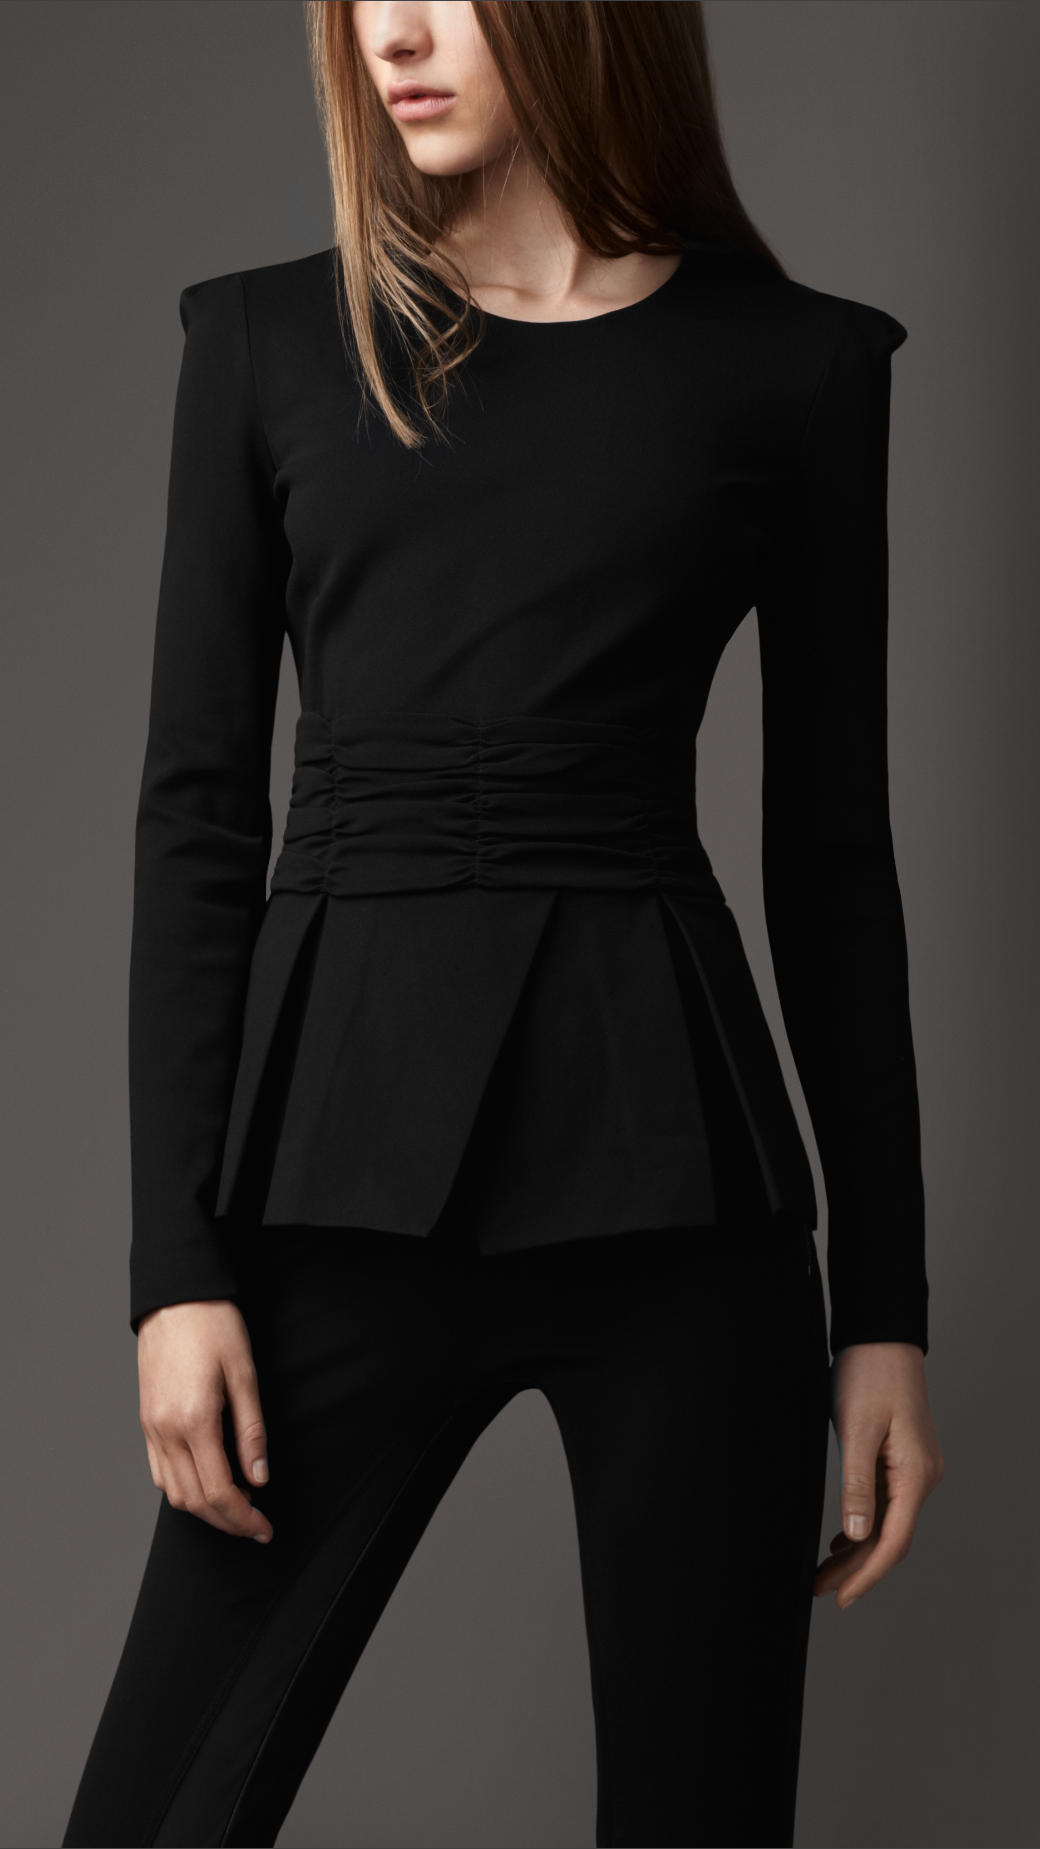 Lyst - Burberry Pleated Peplum Blouse in Black